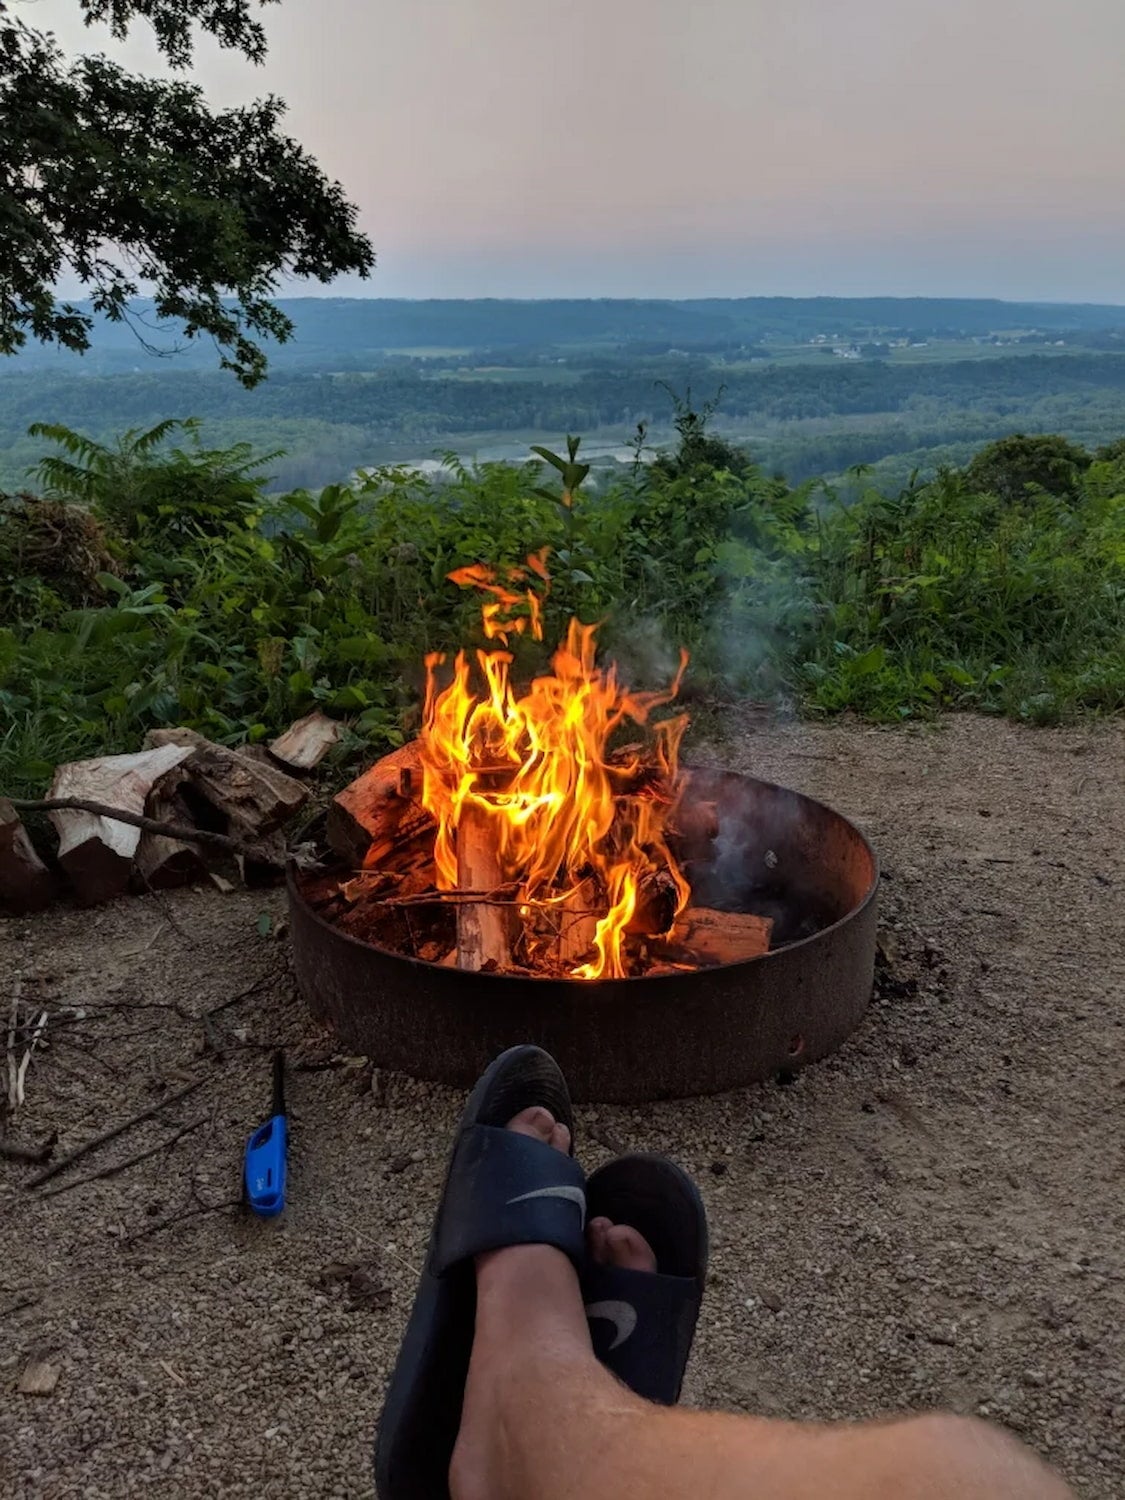 Point of view image showing legs of the photographer crossed i front of fire pit overlooking valley below.